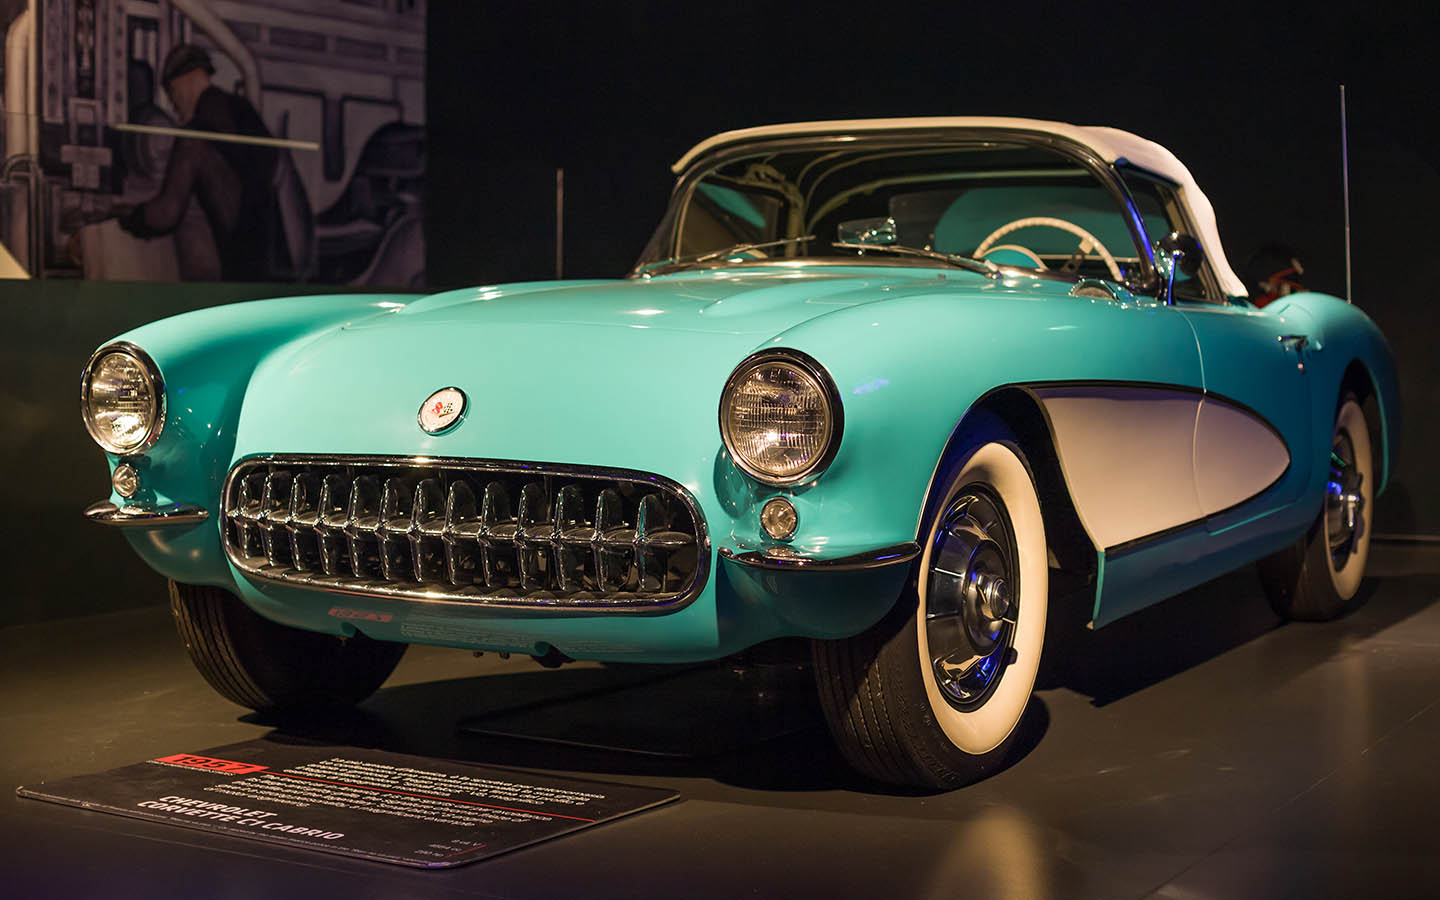 chevrolet corvette history has seen the vehicle gone through some major changes